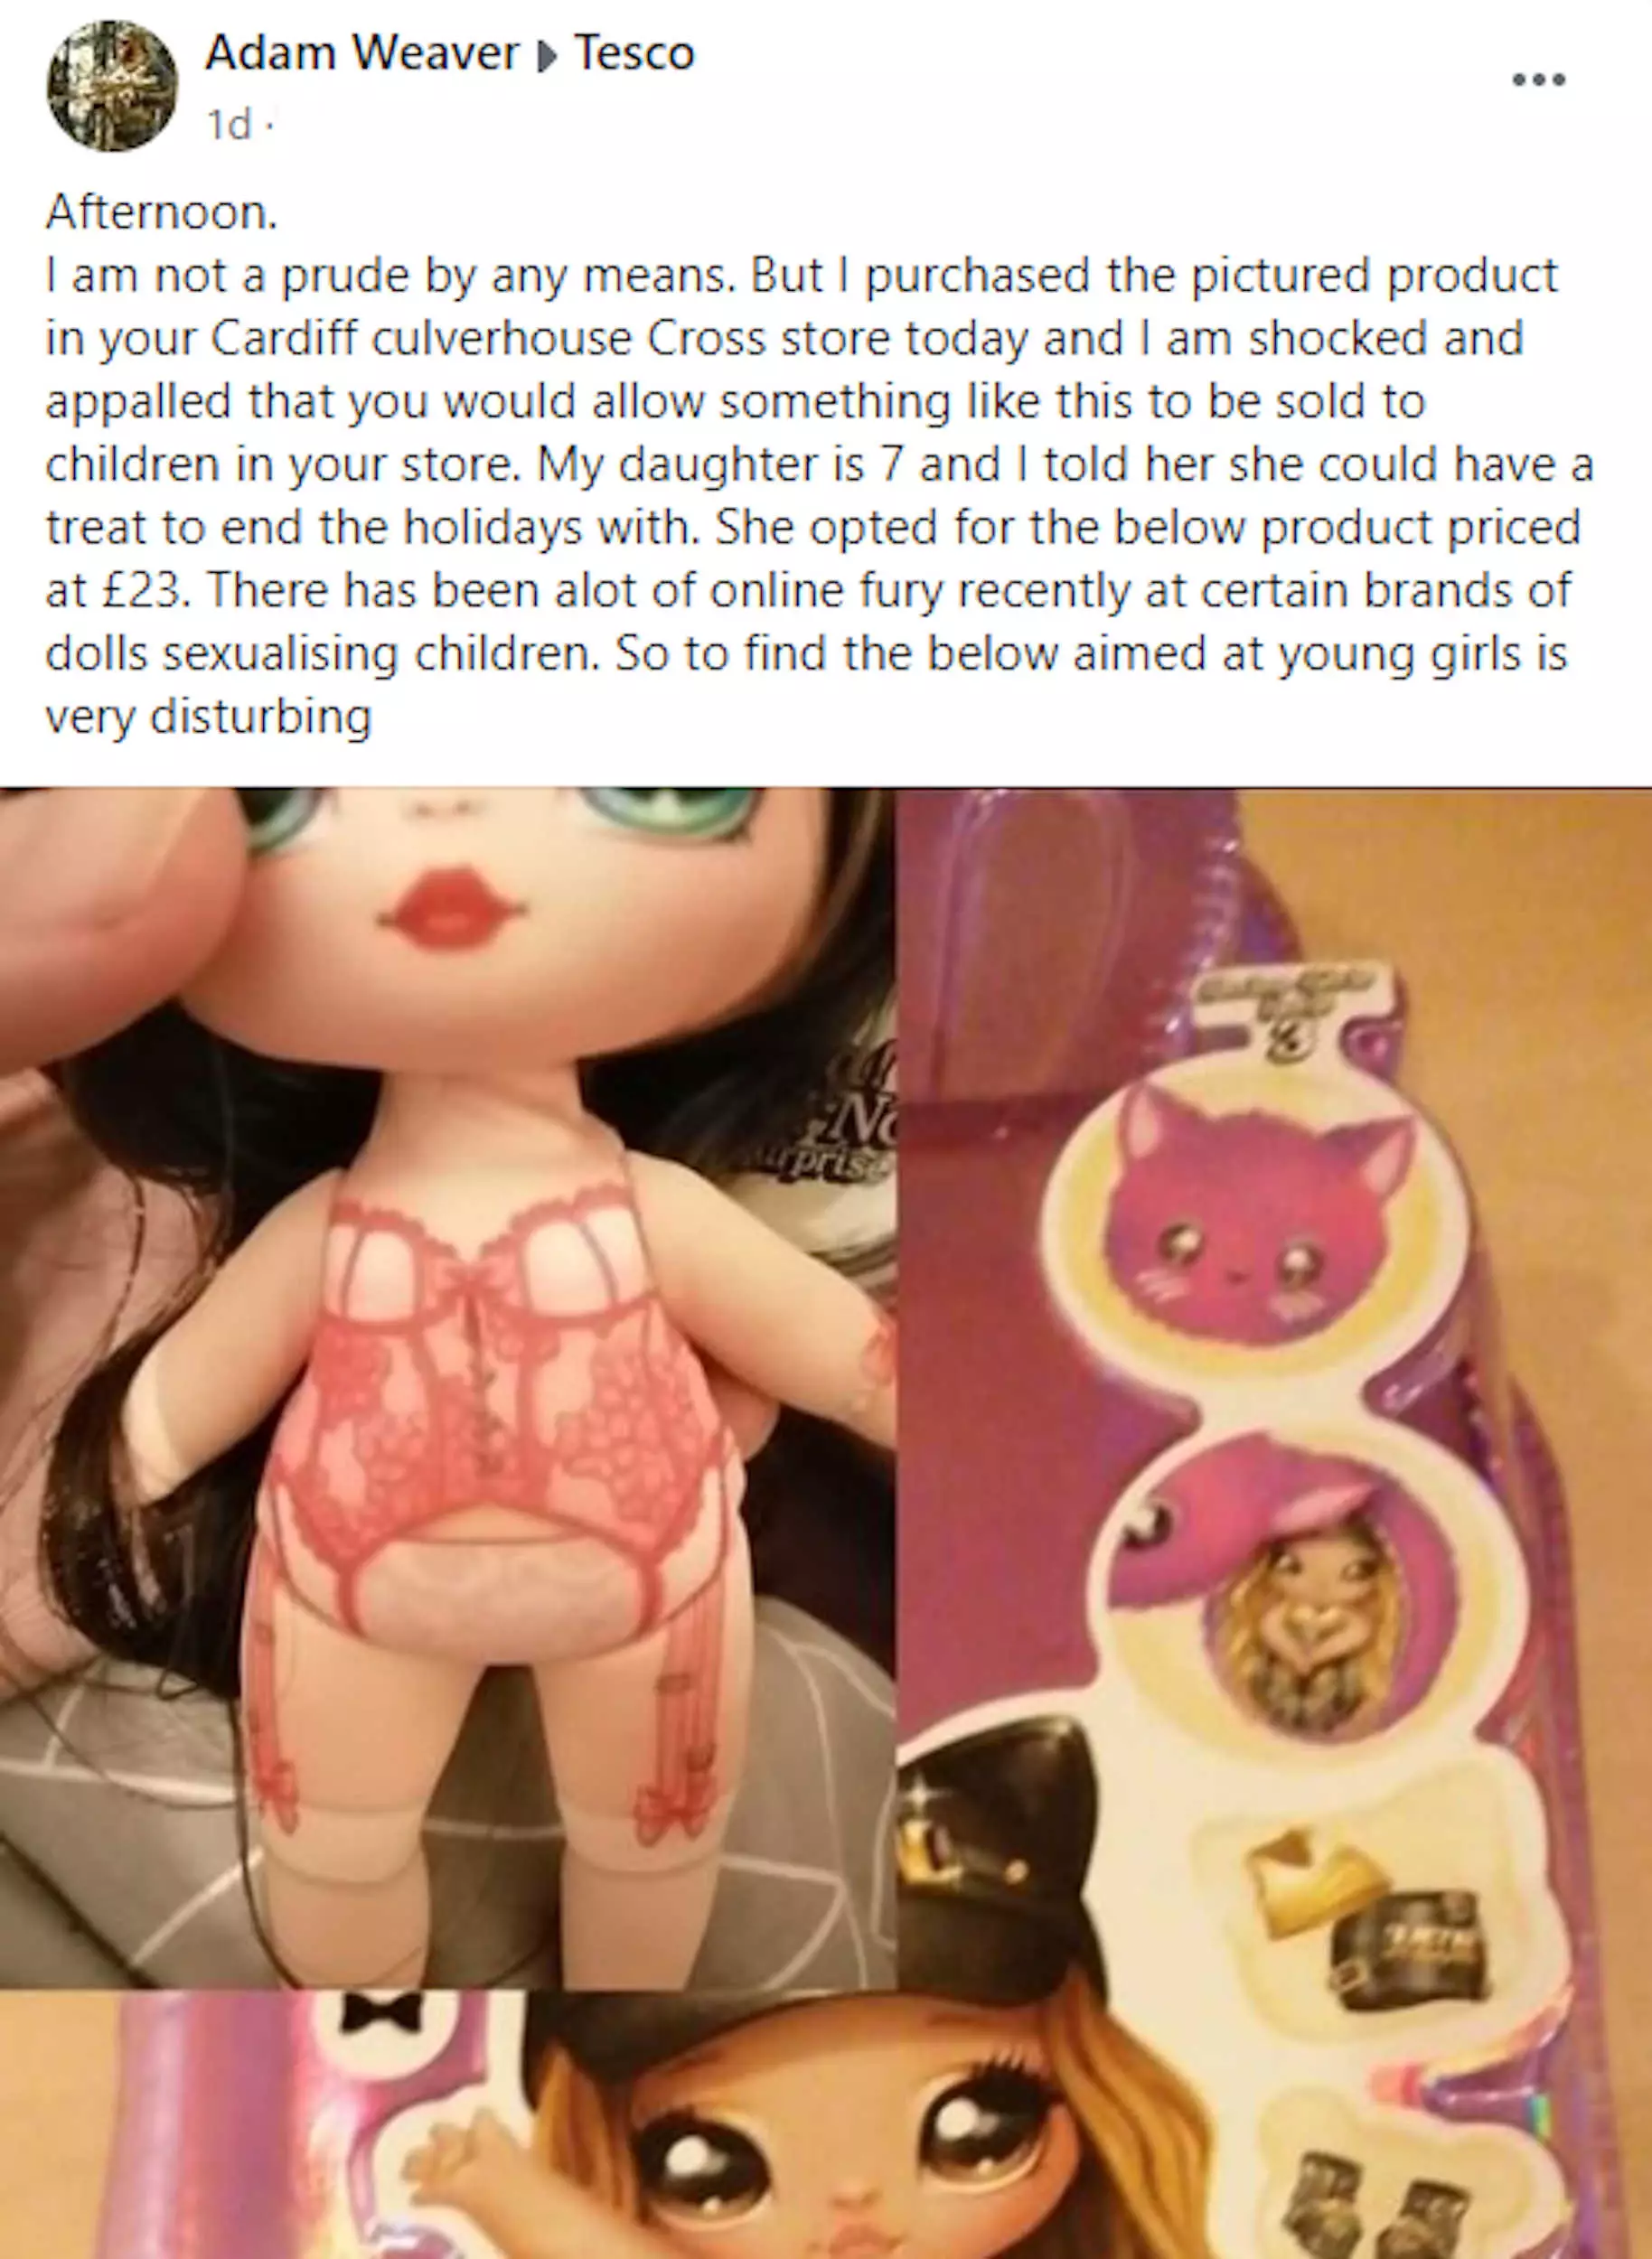 Big W removes kids' LOL dolls after furious Aussie mum exposed their  'hidden' sexual lingerie